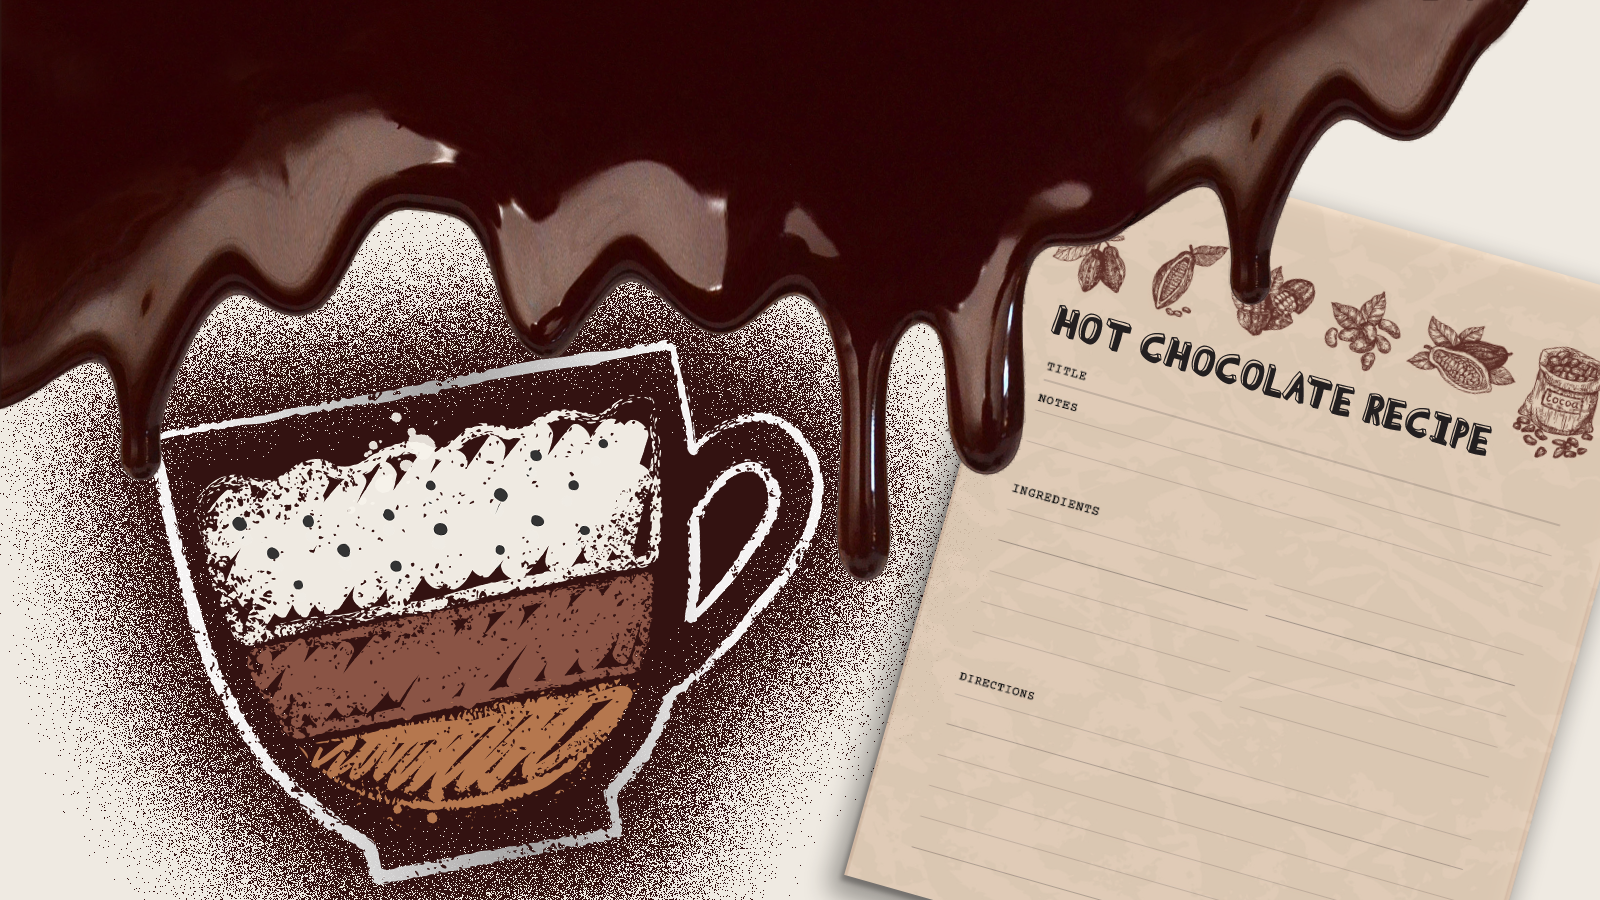 Melted chocolate dripping from top of image over a hot chocolate recipe card and a chalk illustration of a cup of hot cocoa